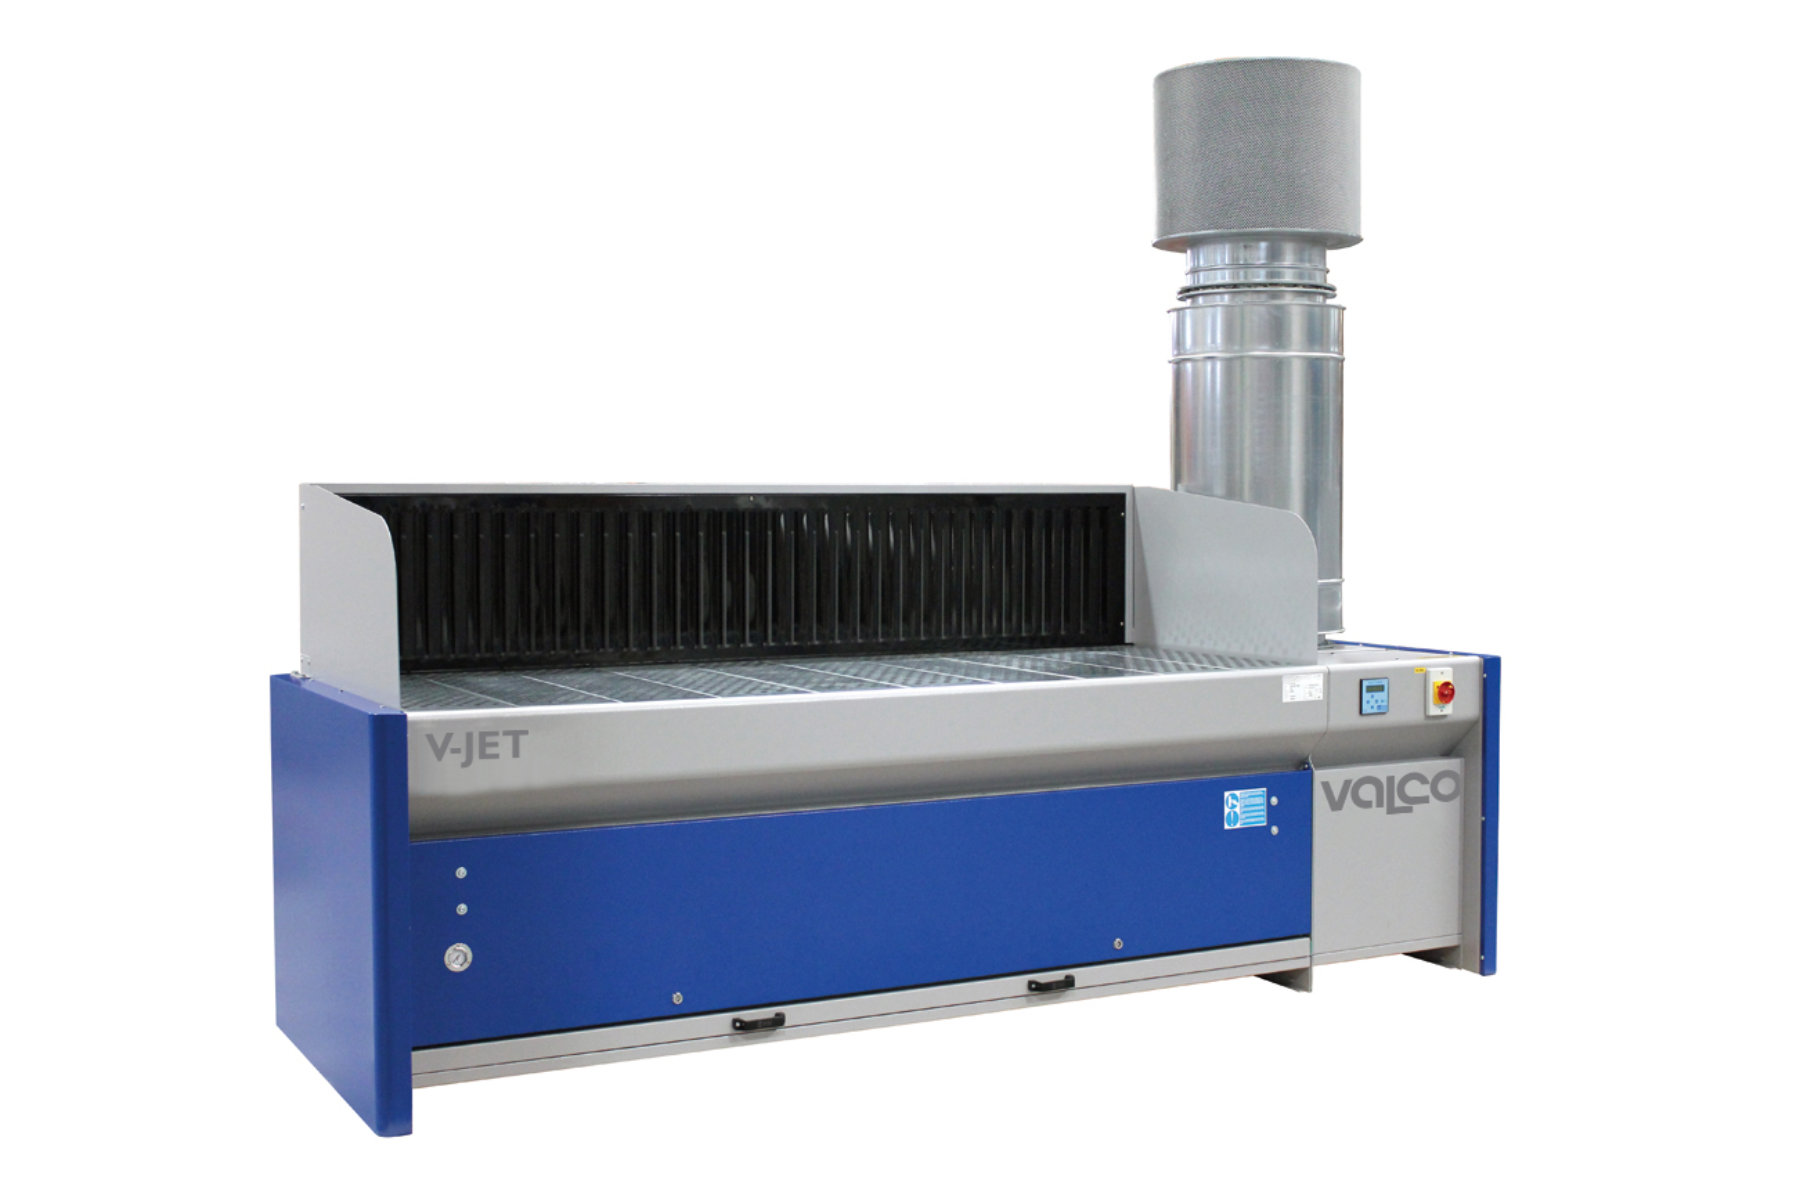 Extraction table V-JET with integrated filter system